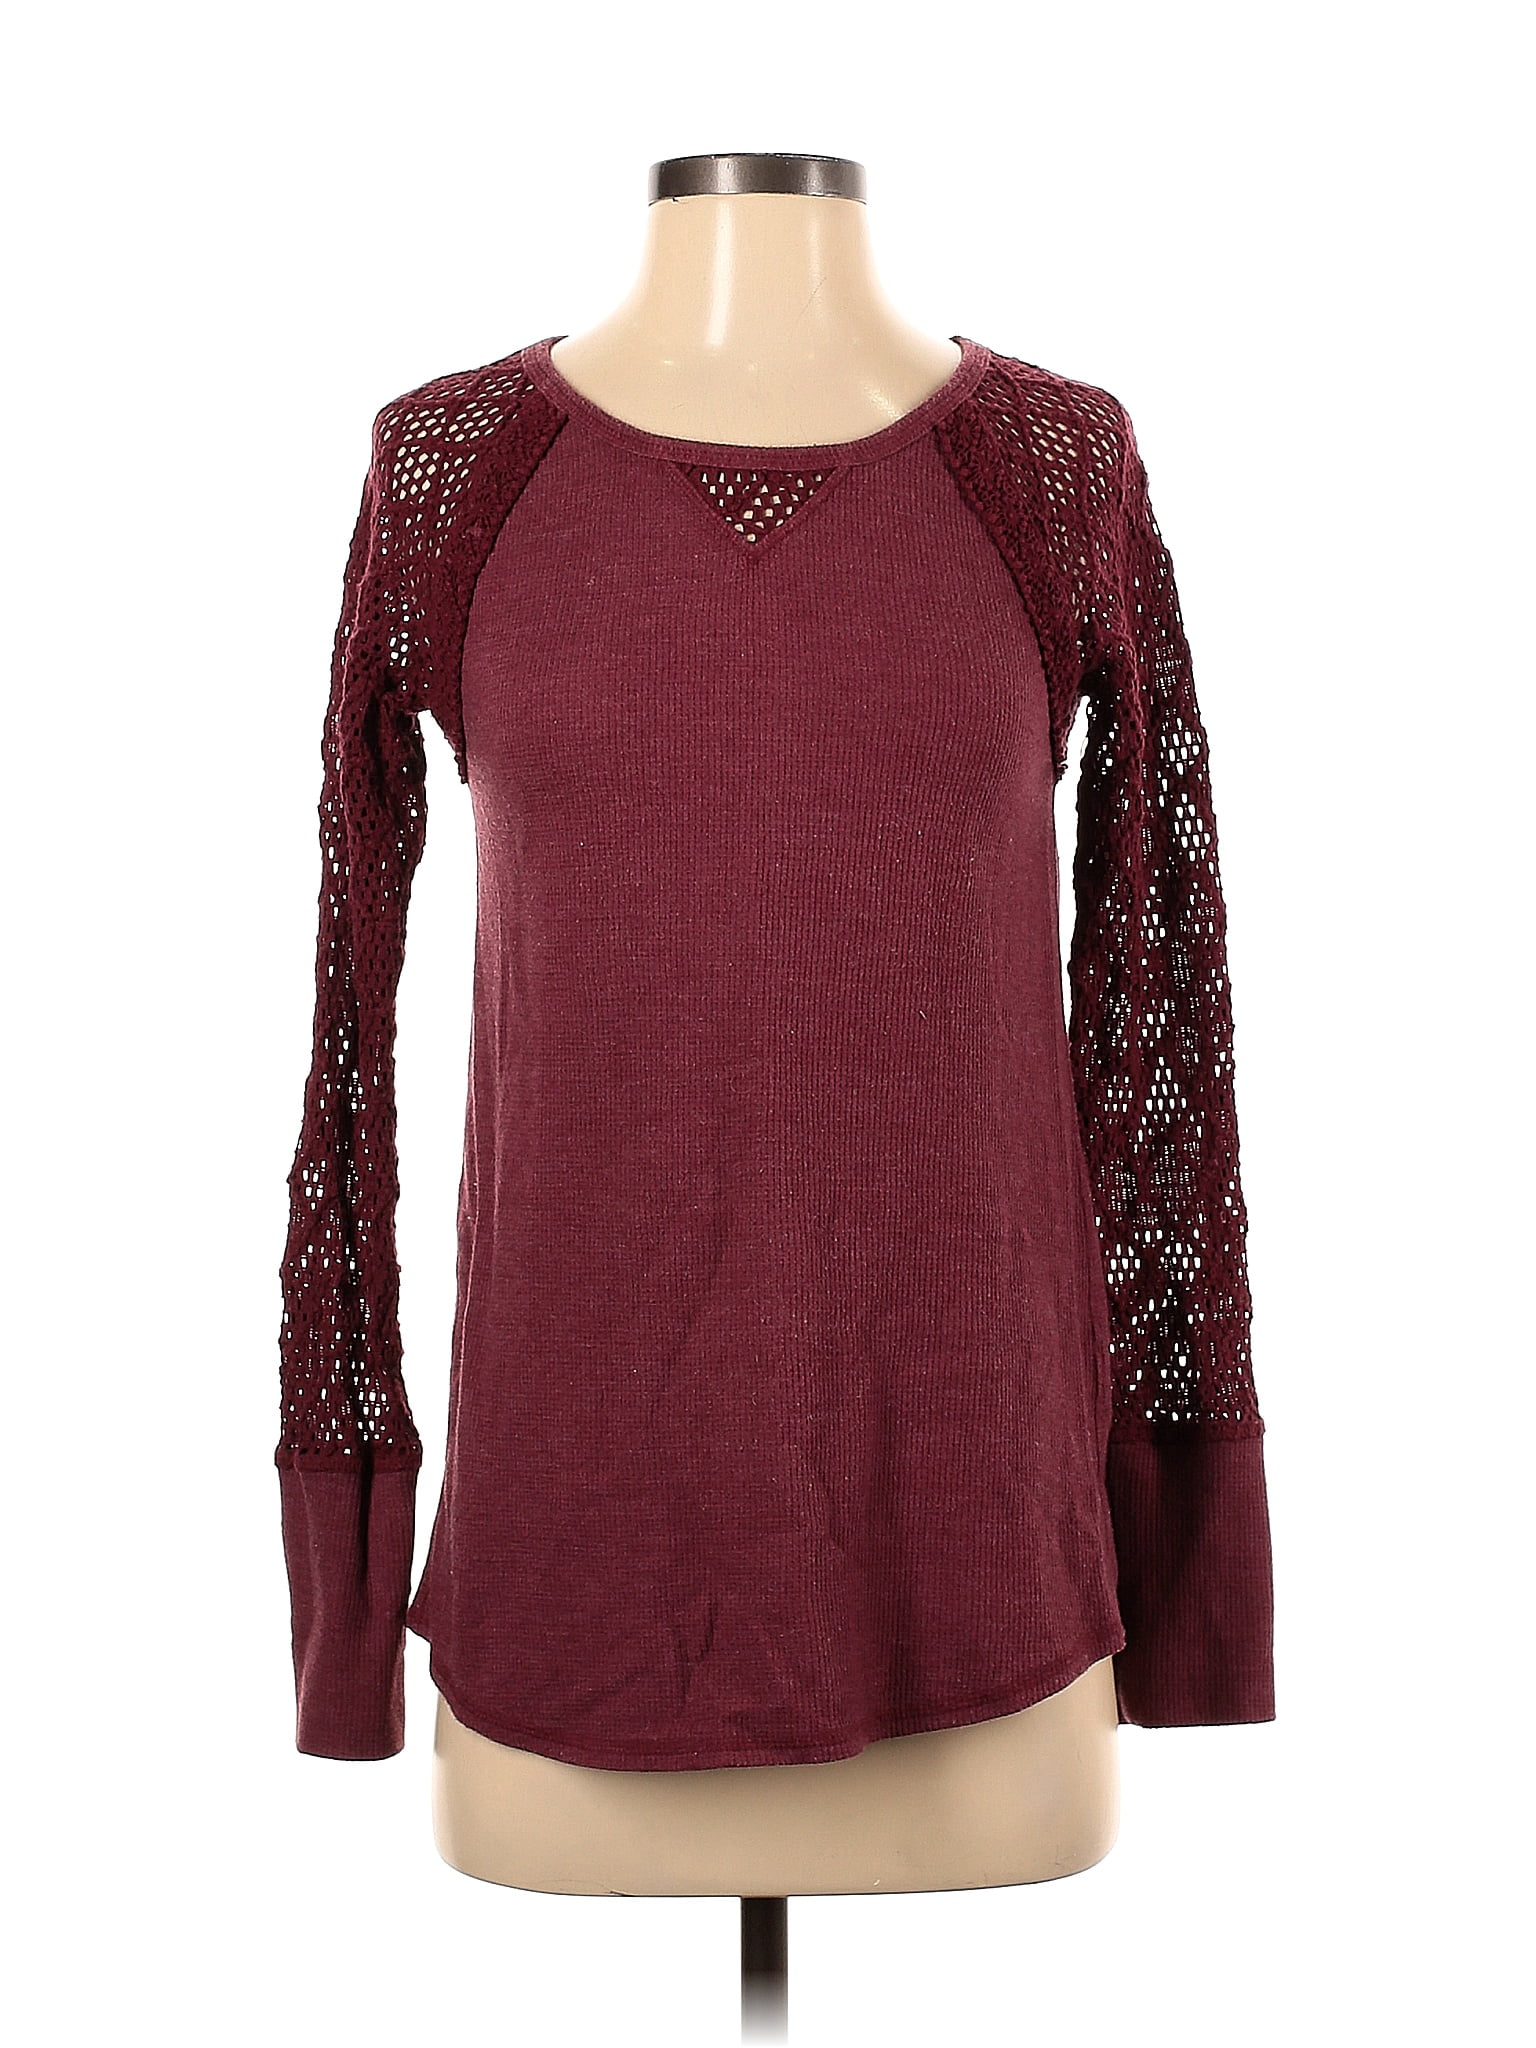 Lucky Brand Maroon Burgundy Long Sleeve Top Size S - 76% off